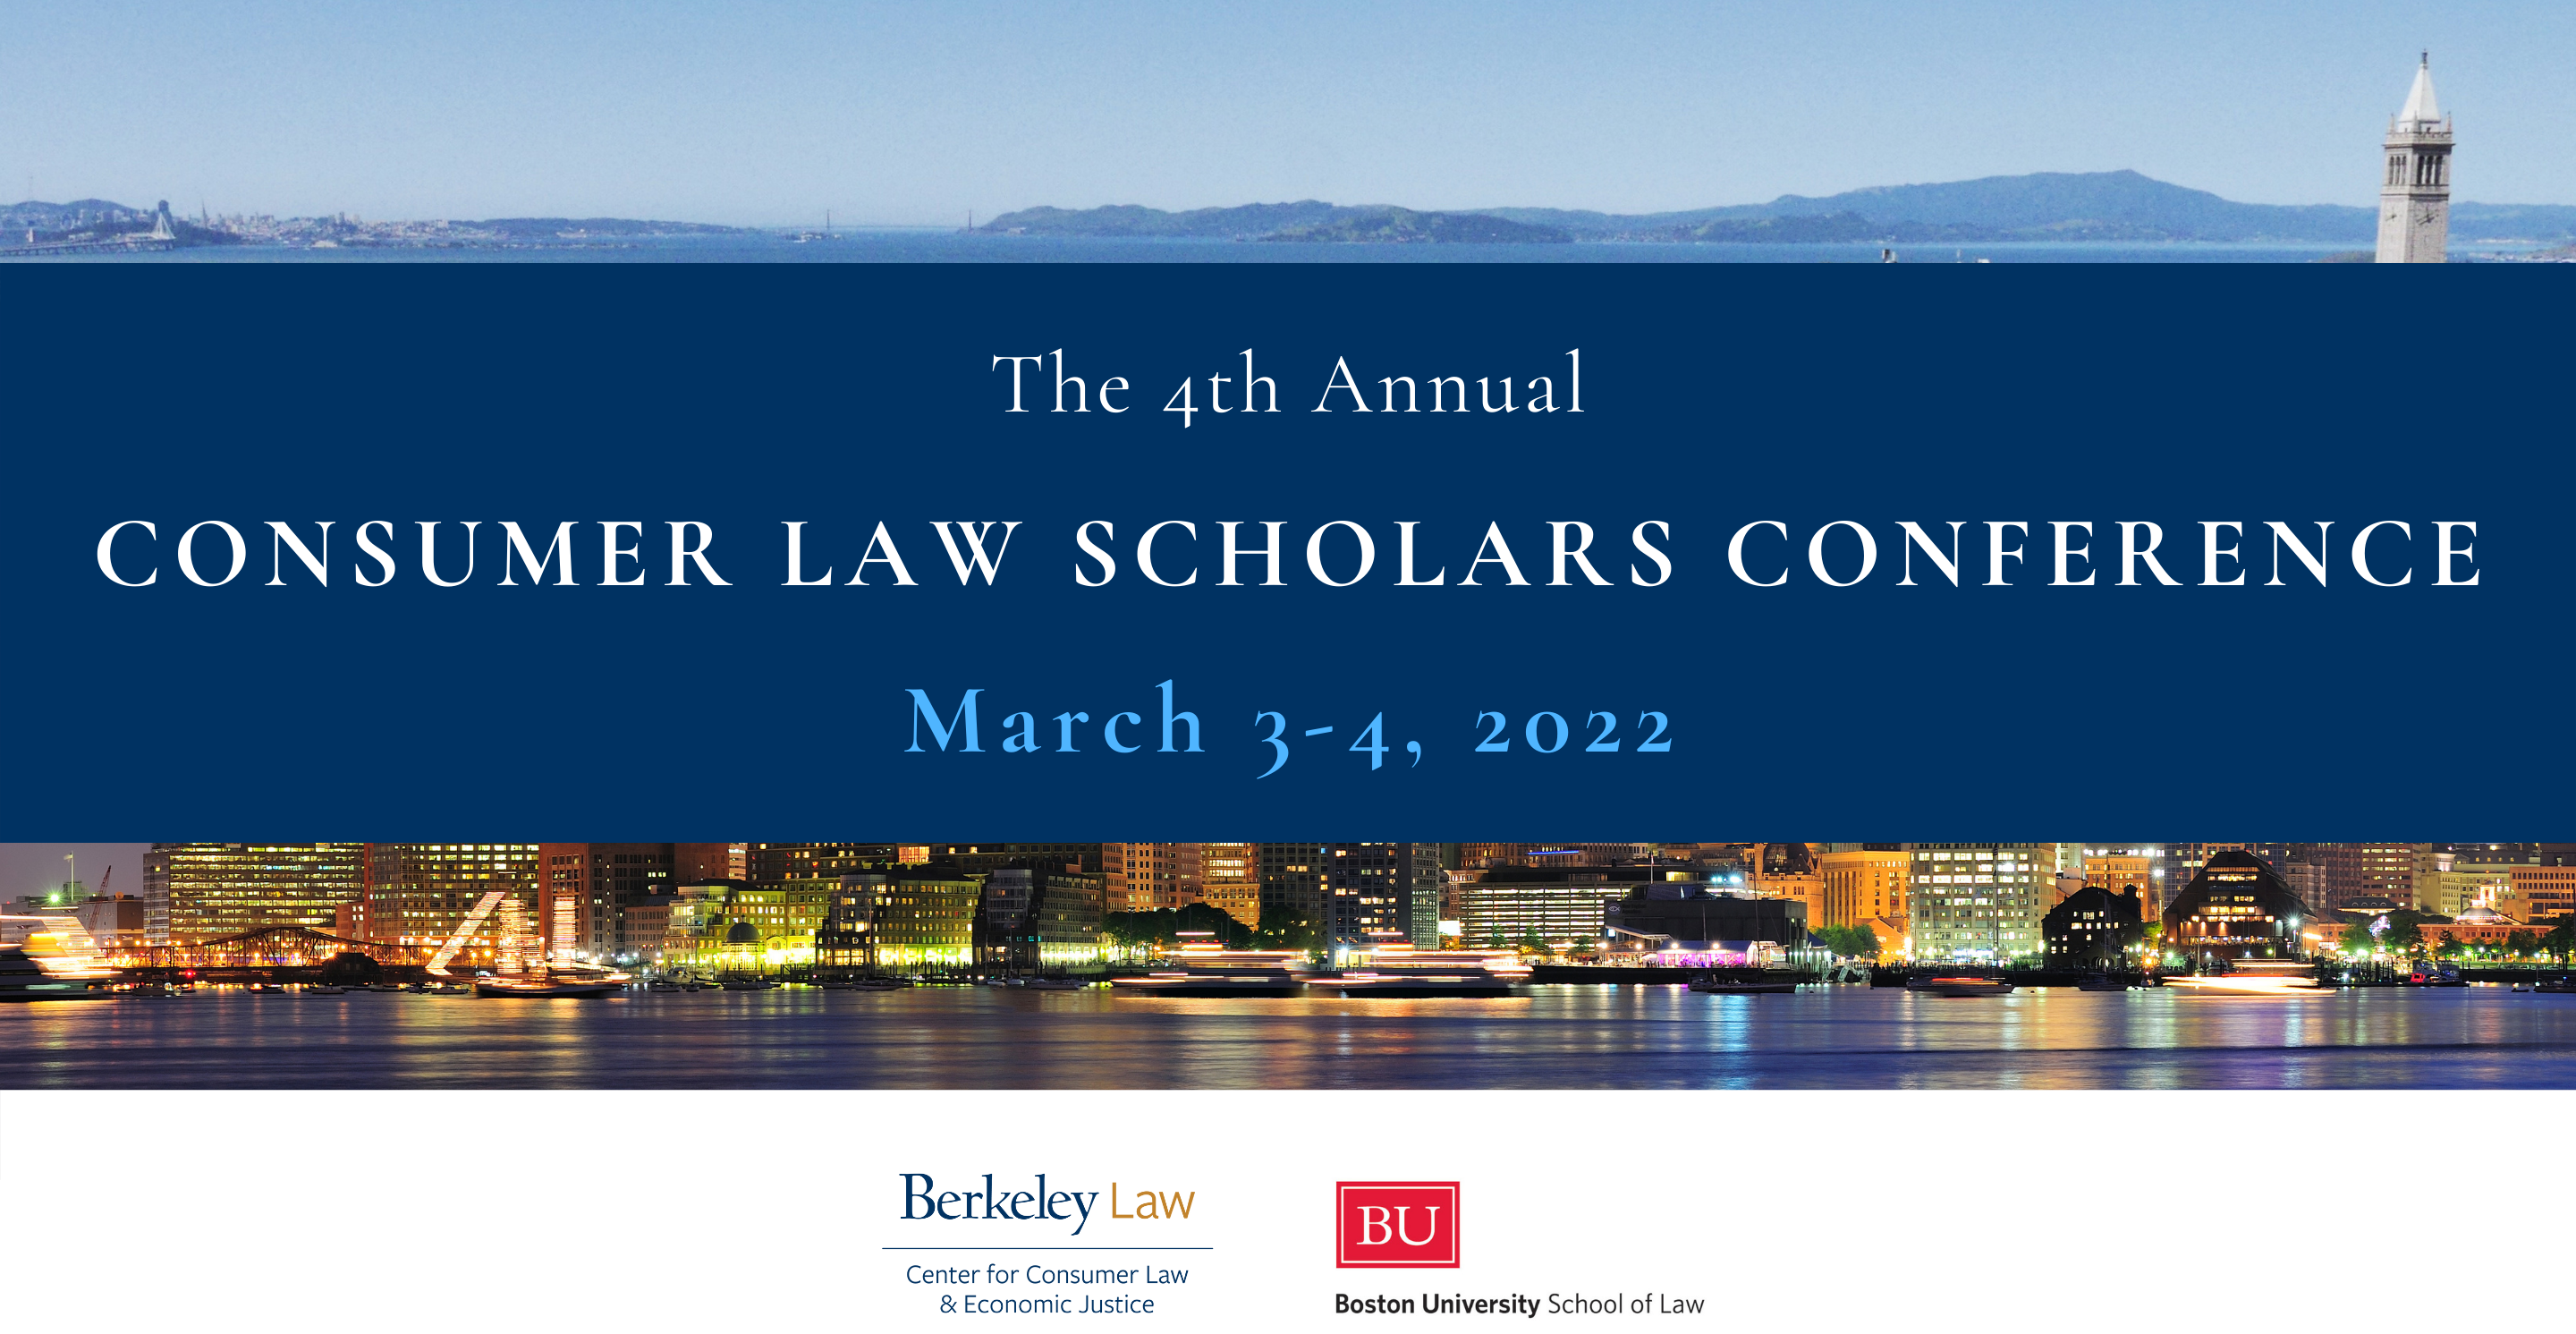 Panoramic image of the Bay Area and the Berkeley Campanile, text that reads The 4th Annual Consumer Law Scholars Conference, March 3-4, 2022, and a panoramic image of the Boston Harbor and skyline at night.